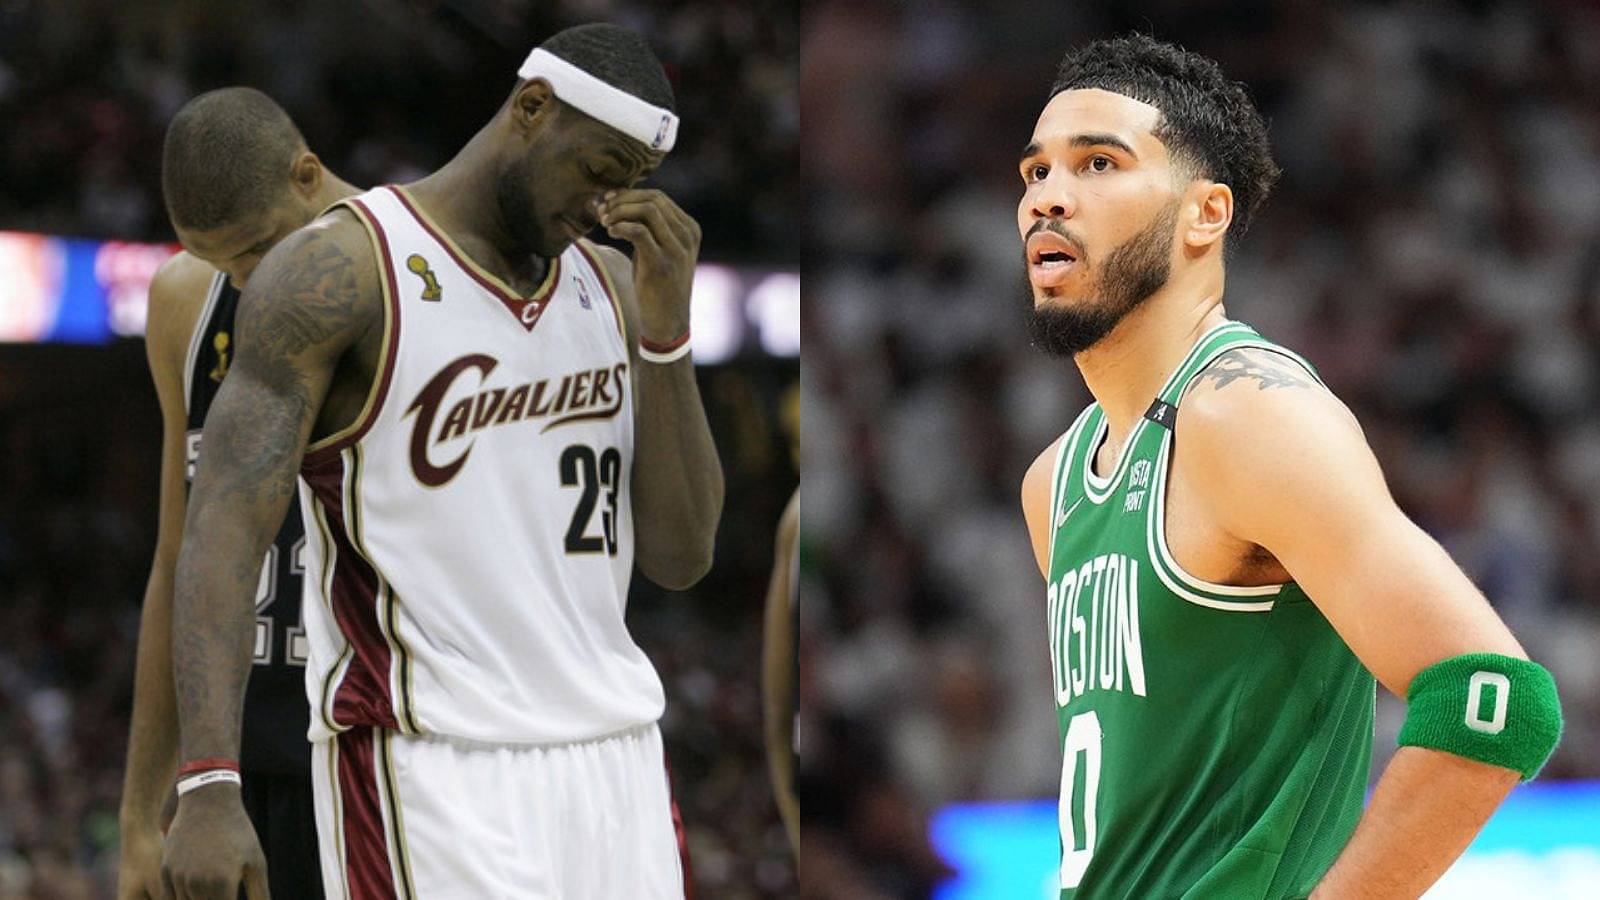 “LeBron James in his first Finals was 22/7/7 shooting 36% and so is Jayson Tatum shooting 37%”: A wild stat by NBA Twitter shows Celtics star’s identical Finals numbers to Lakers star